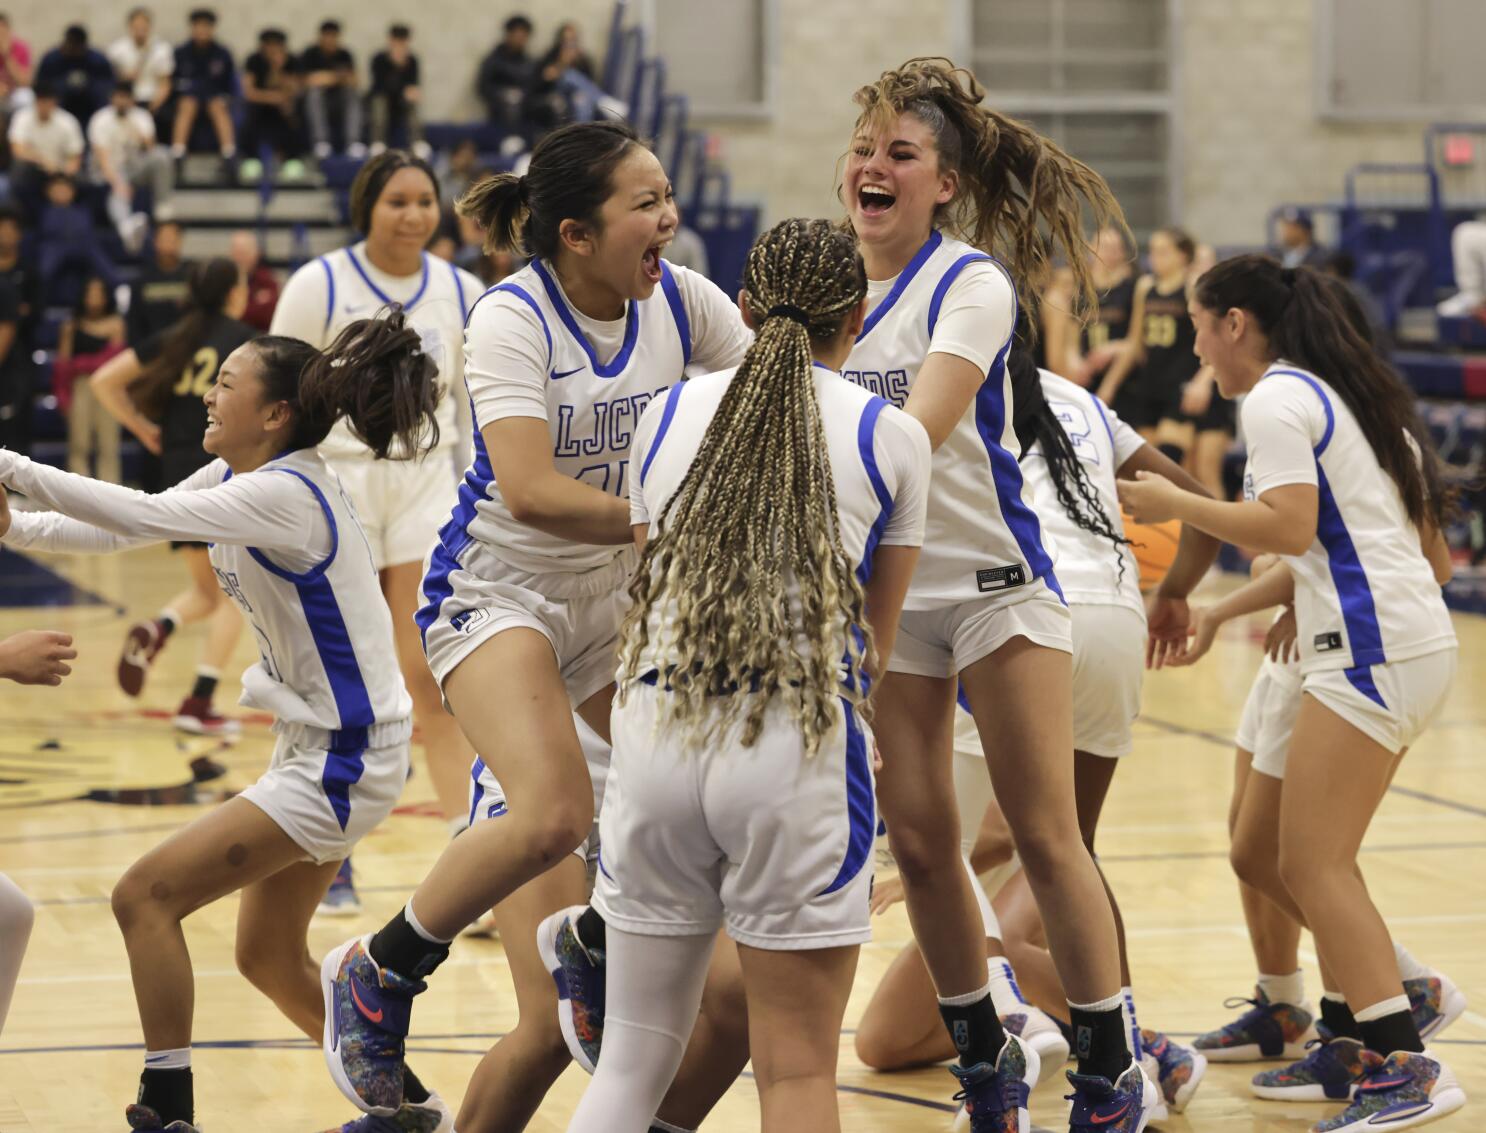 Verdugo Hills takes care of business in first round of the State tournament